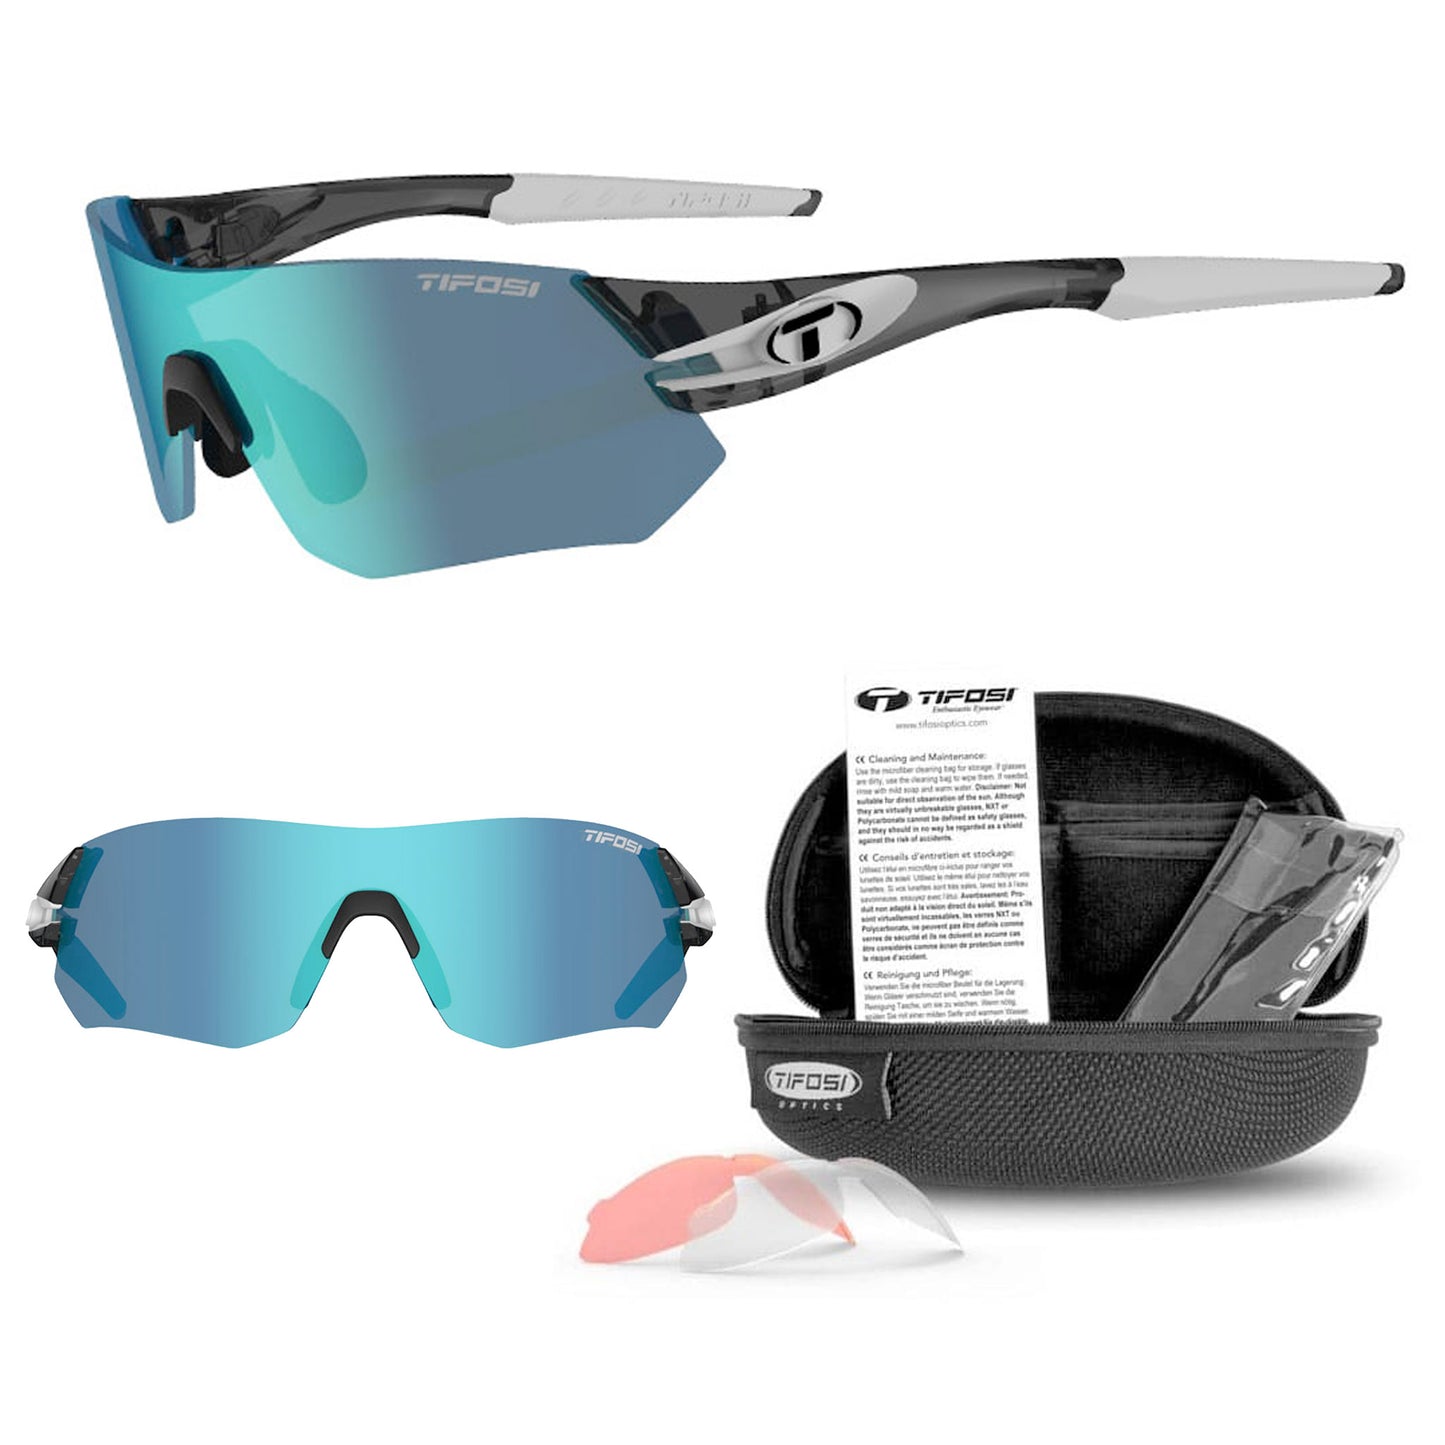 Tifosi Tsali Cycling Sunglasses With Three Interchangeable Lenses - Crystal Smoke/White buy online at Woolys Wheels Sydney with free delivery